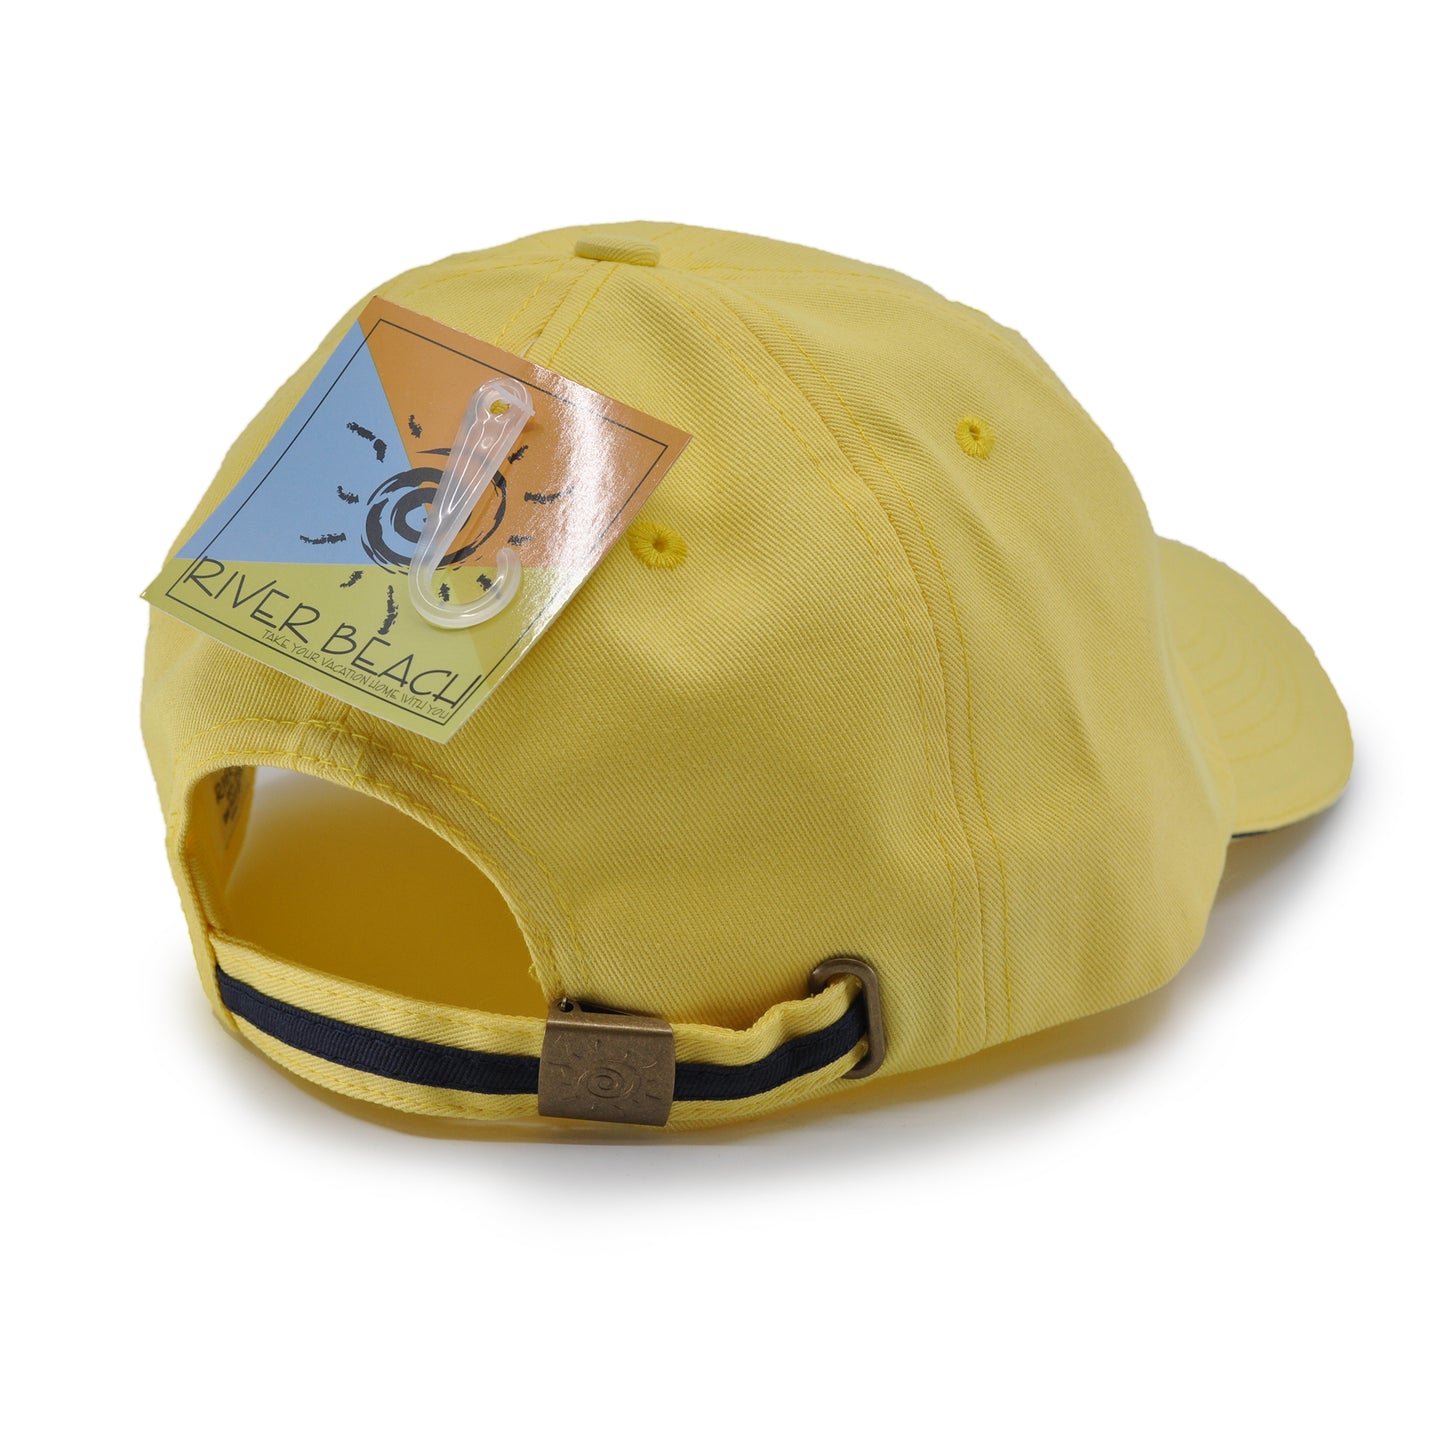 River Beach 100% cotton Unisex Sports Cap in color Sunlight Yellow. Back View showcasing buckle enclosure.